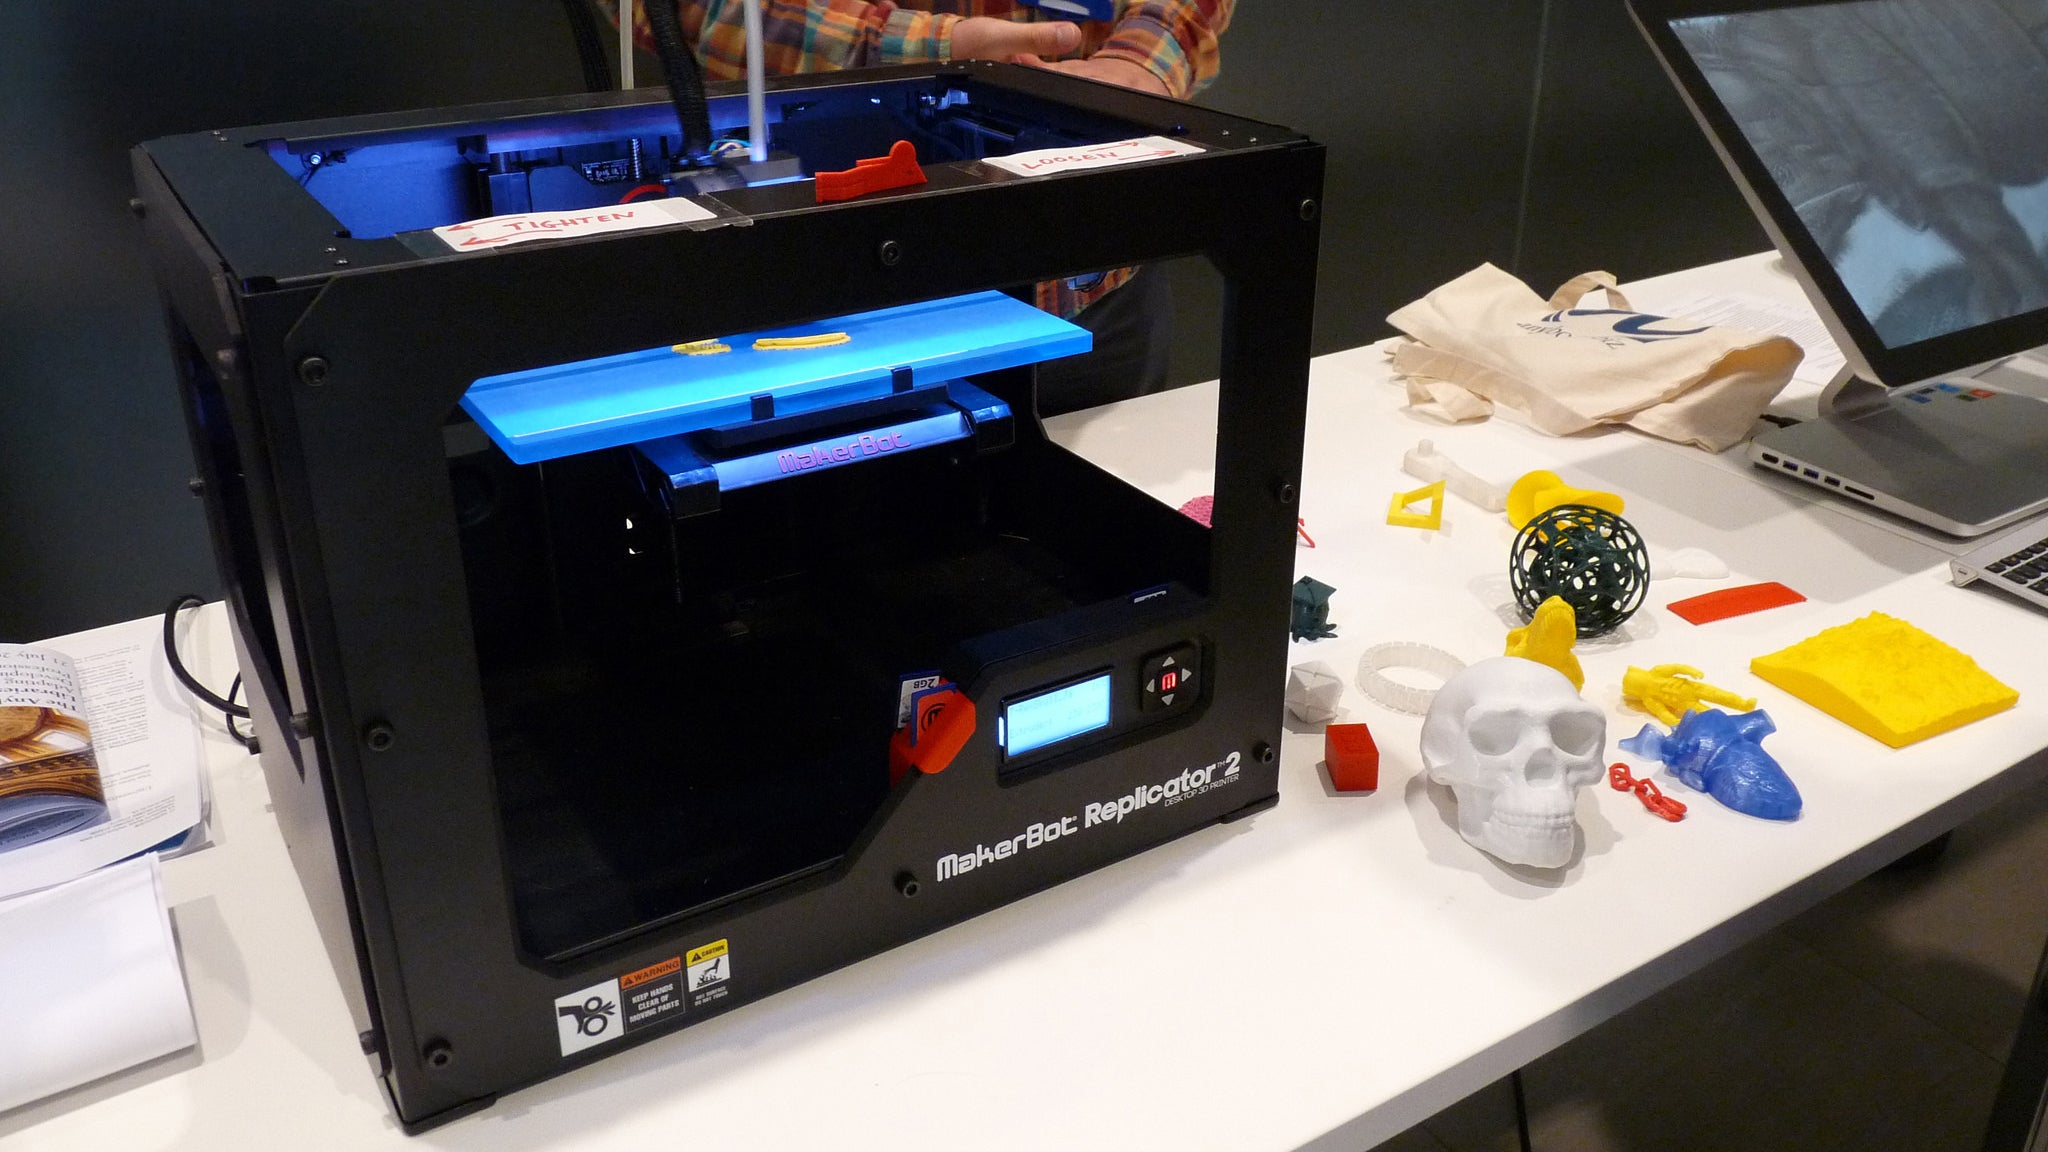 How to Make 3D Printed Stuff Without Owning a 3D Printer